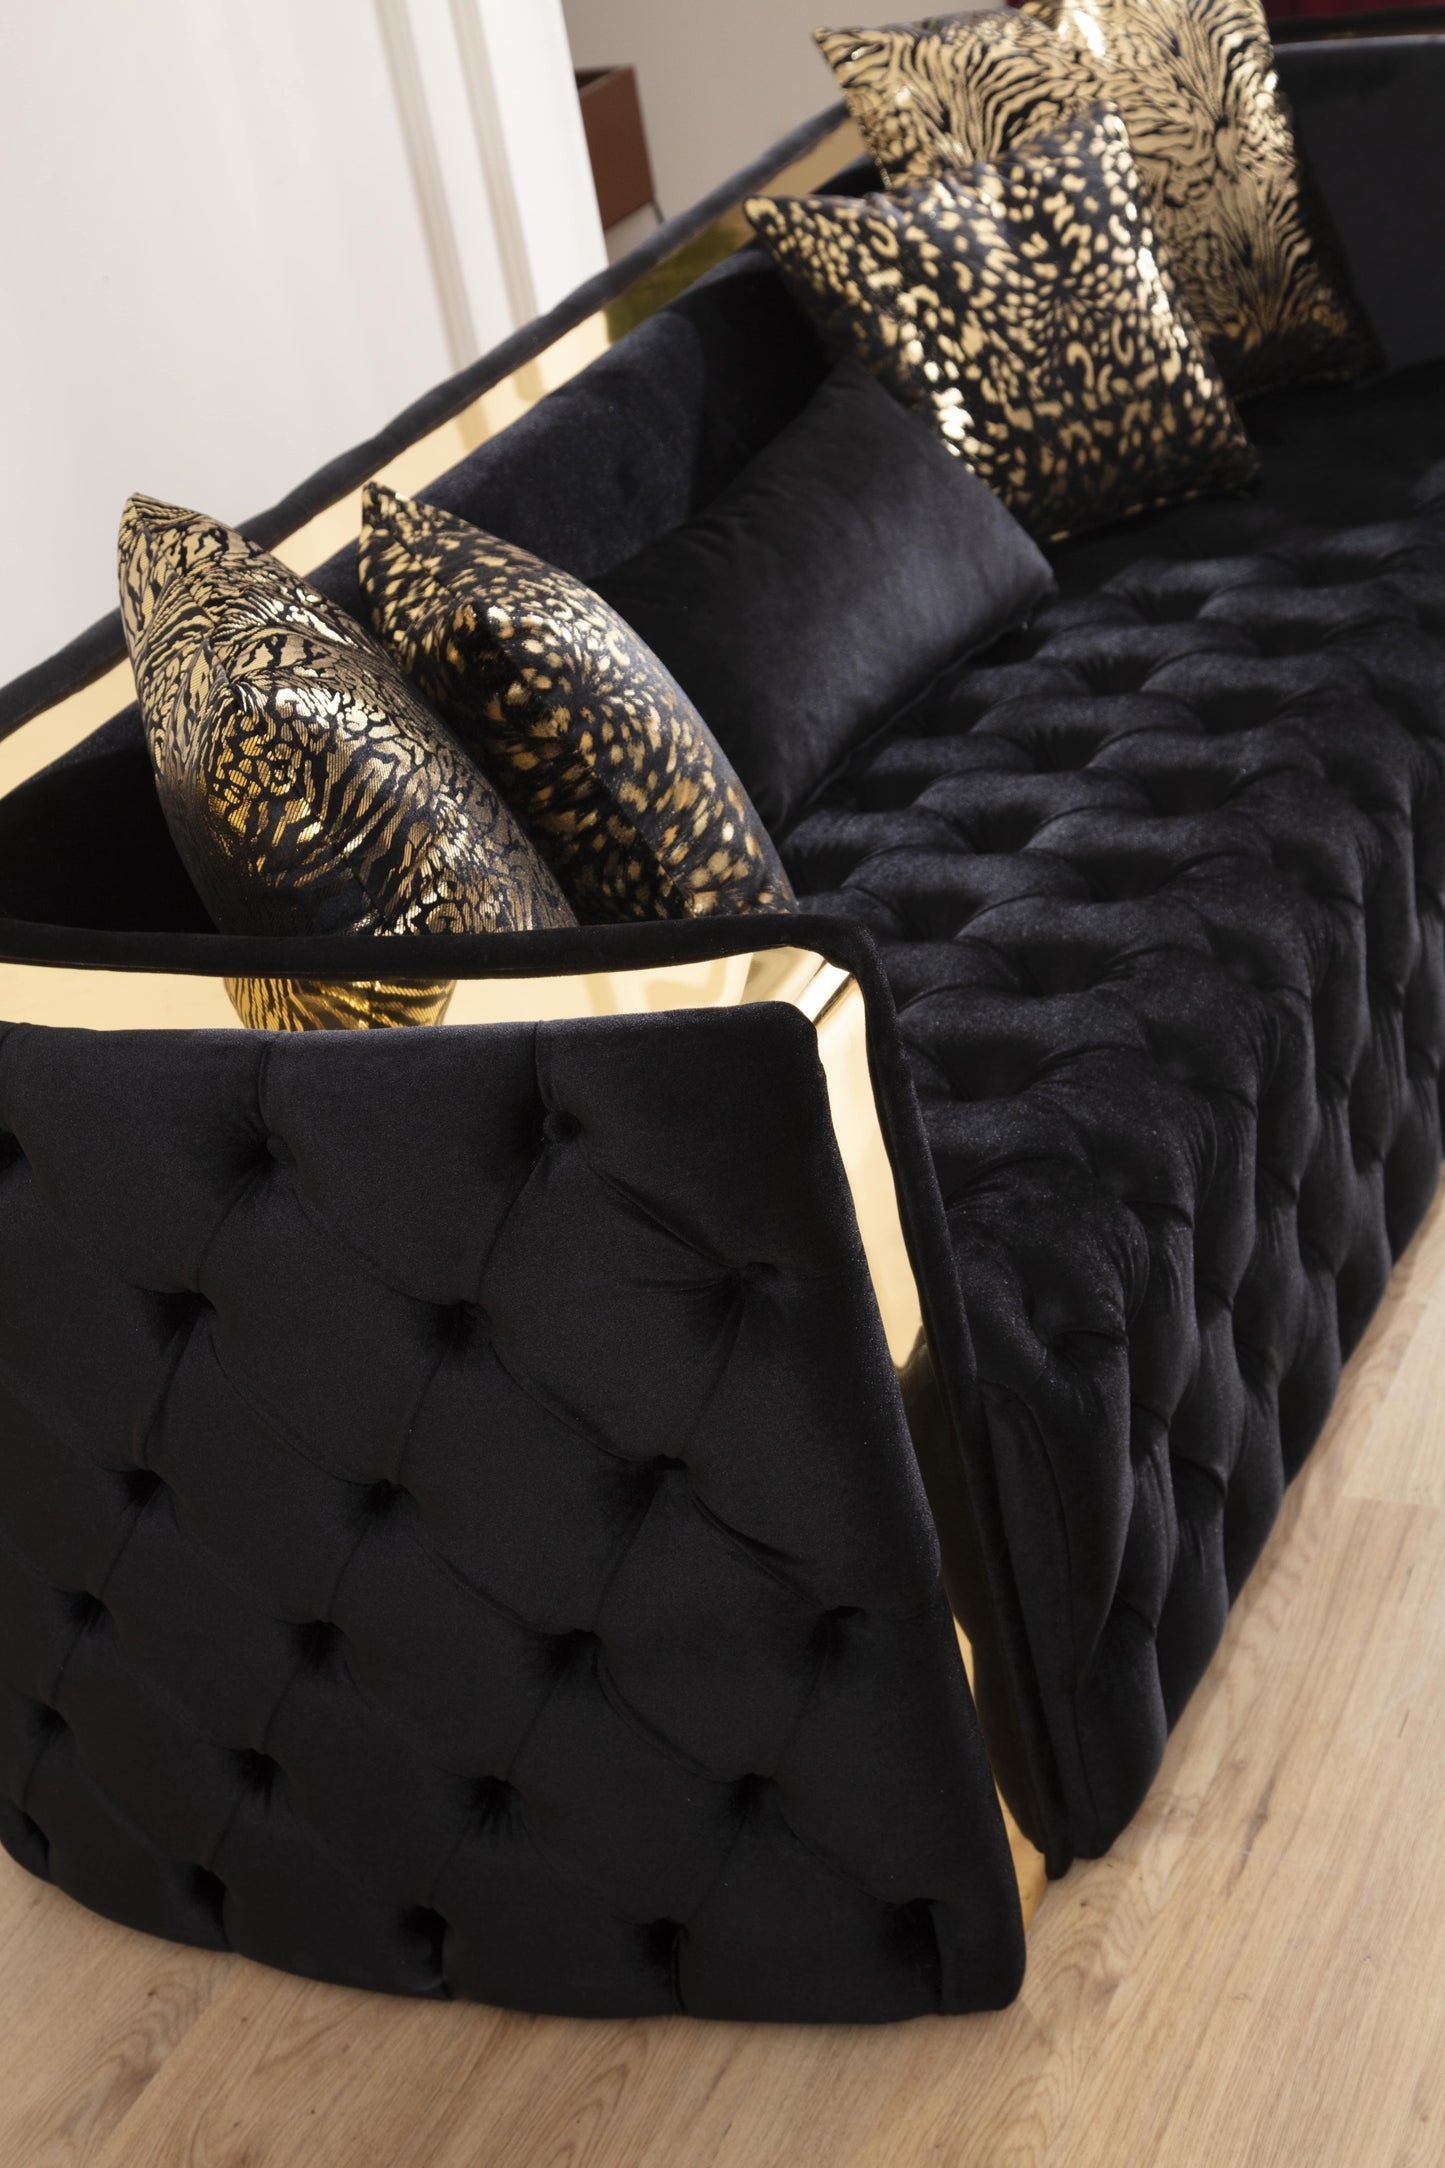 Naomi Button Tufted 3 Pc Sofa Set with Velvet Fabric and Gold Accent in Black